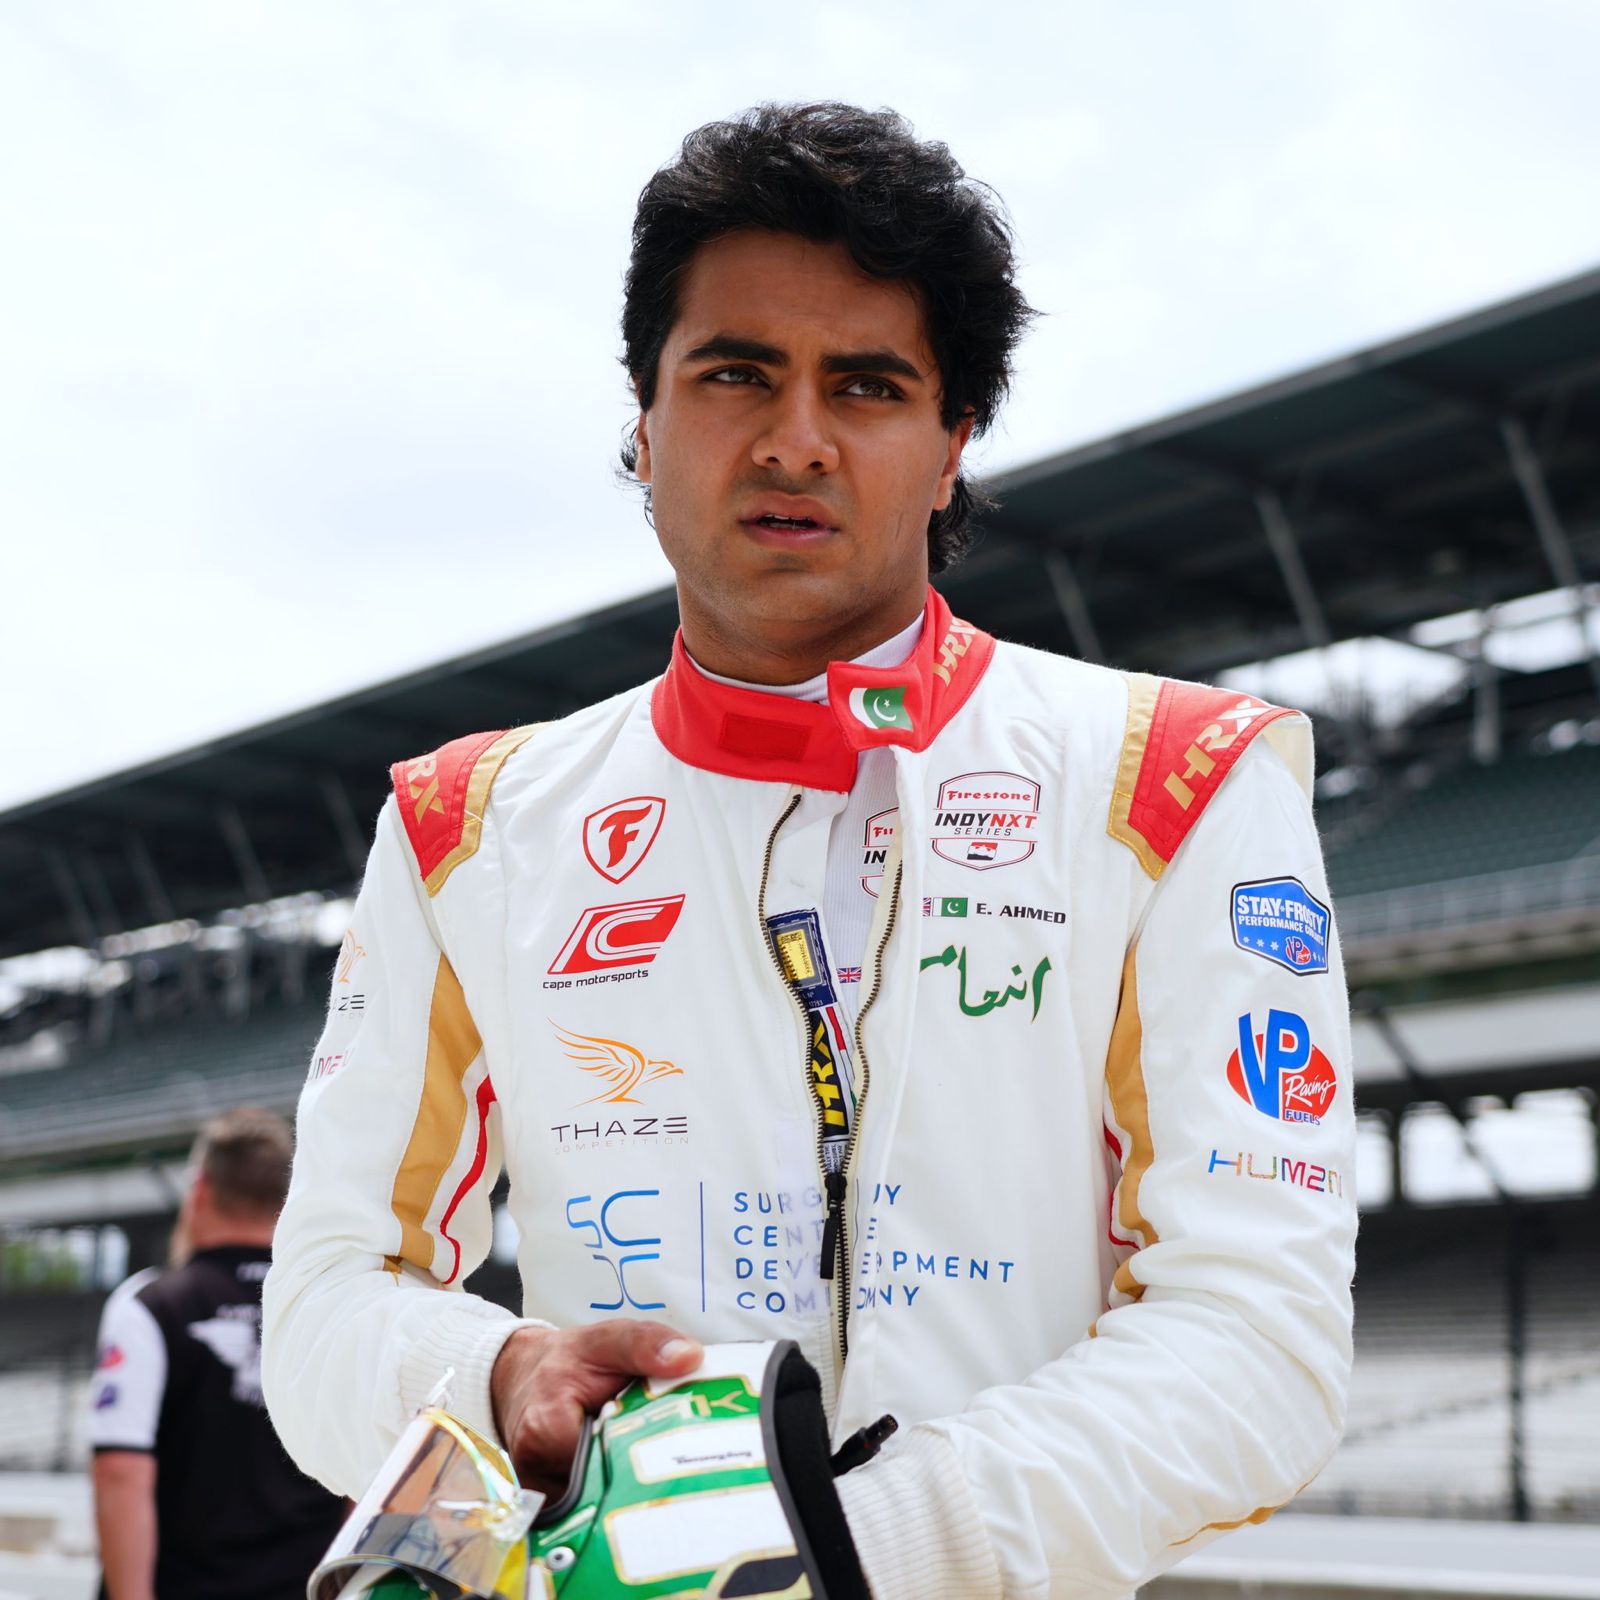 British Pakistani Enaam Ahmed finishes top 5 in the Detroit Grand Prix